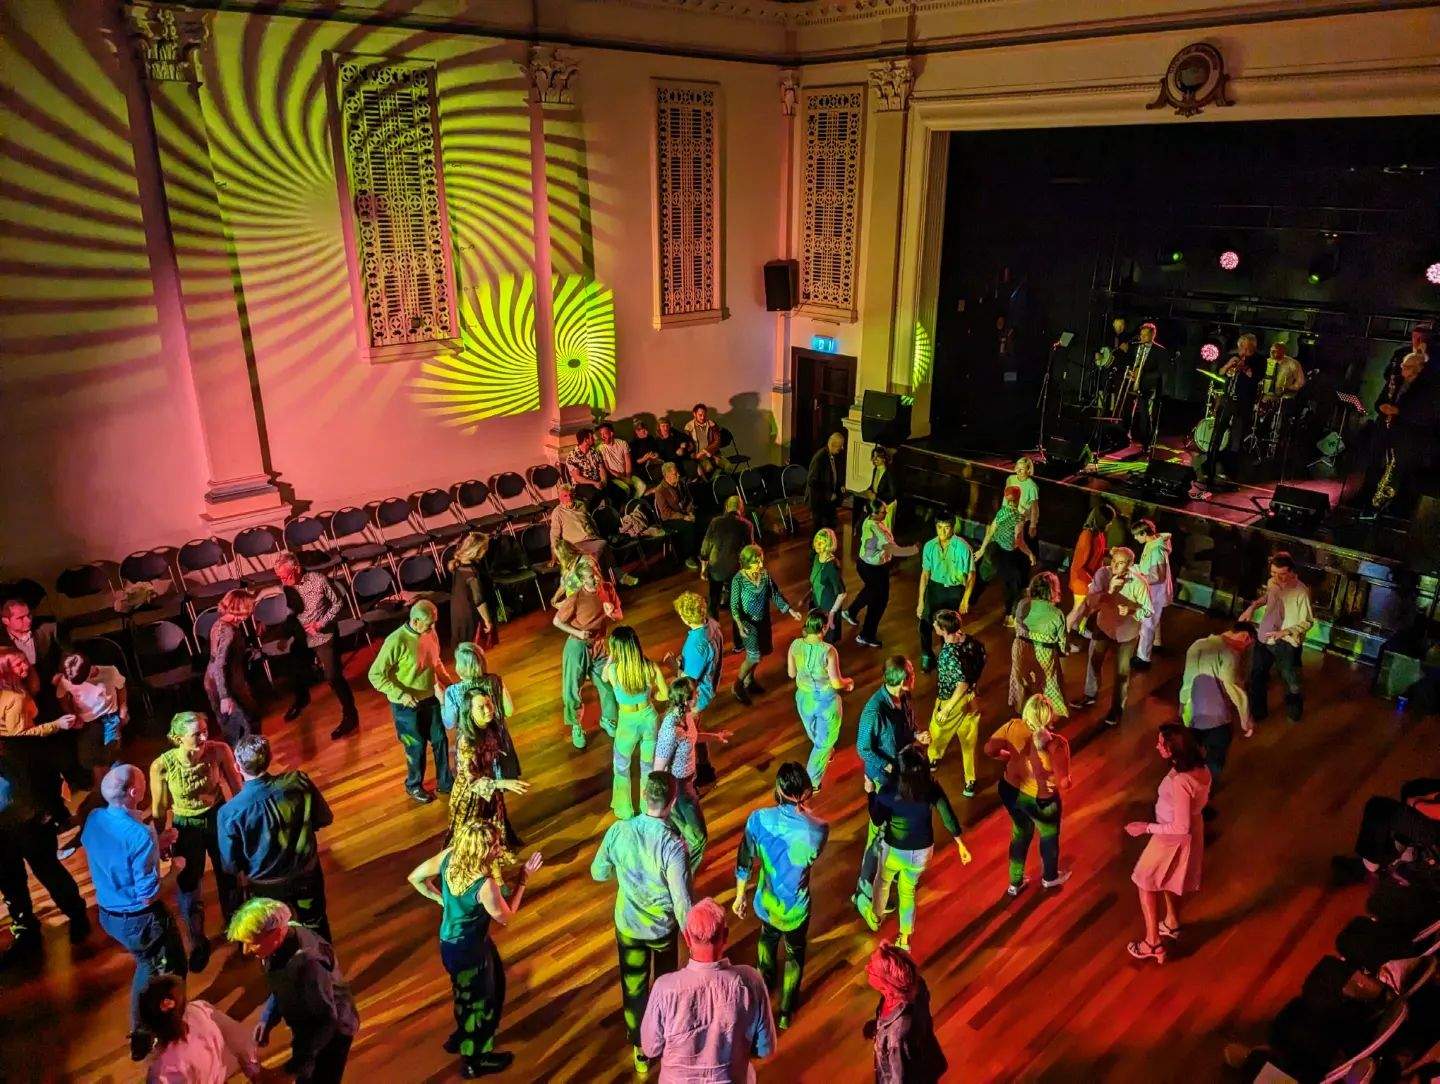 People dancing in a hall